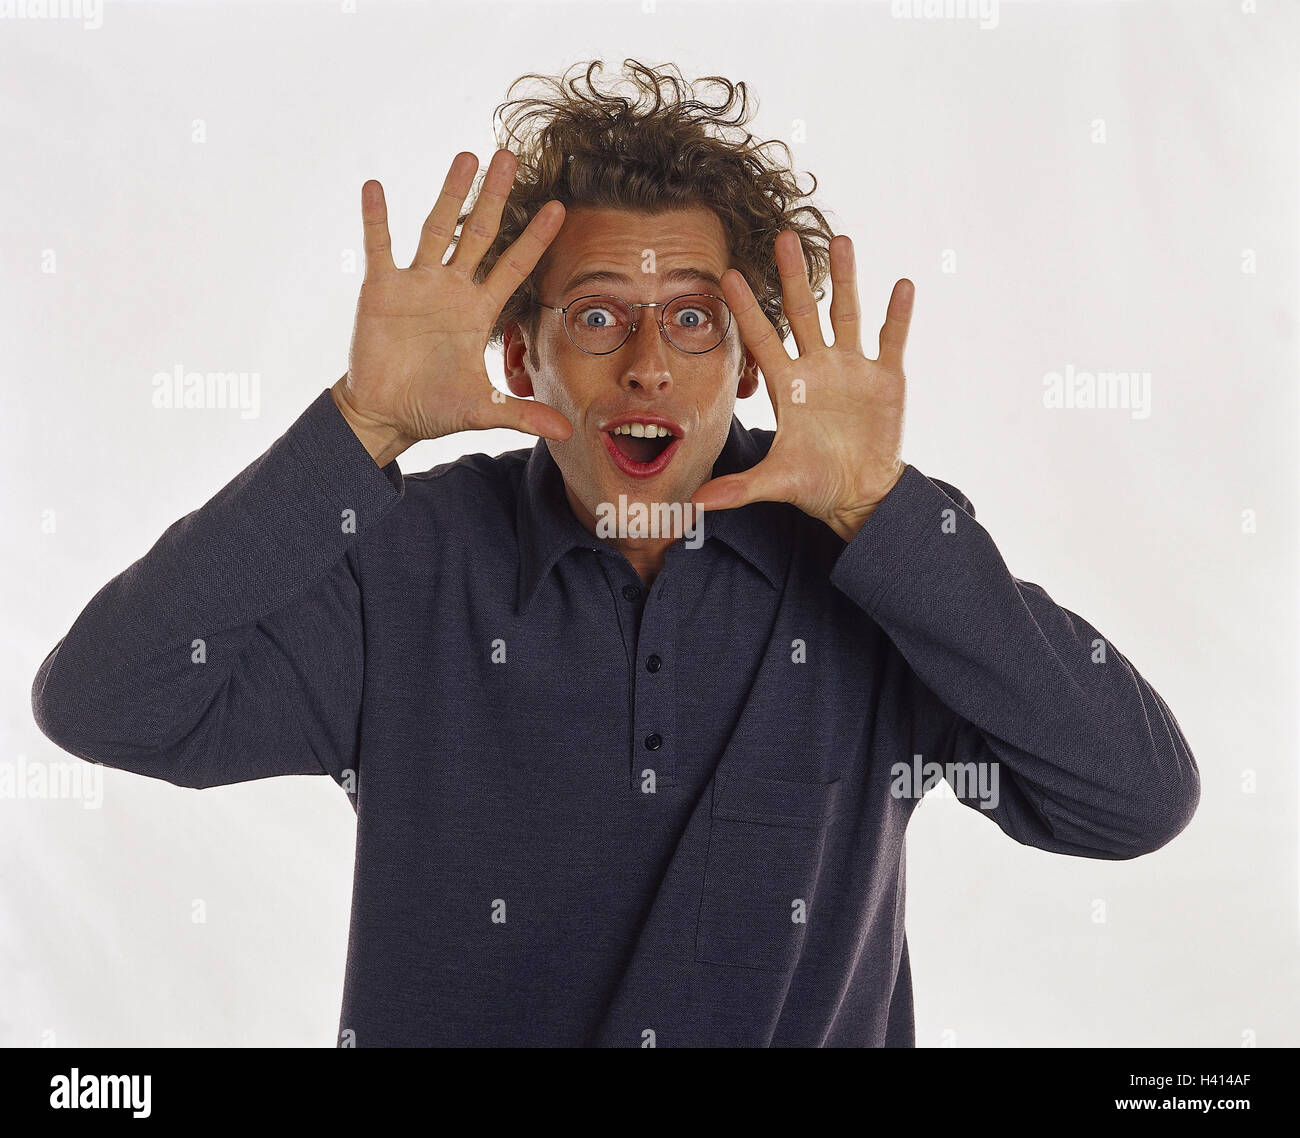 Man, young, glasses, gesture, feel, joy, enthusiasm, half portrait, Men, hairs, wavy, curls, blond, studio, cut out, astonished, surprises, surprise, astonishment, see, discover, discovery, pantomime, Stock Photo